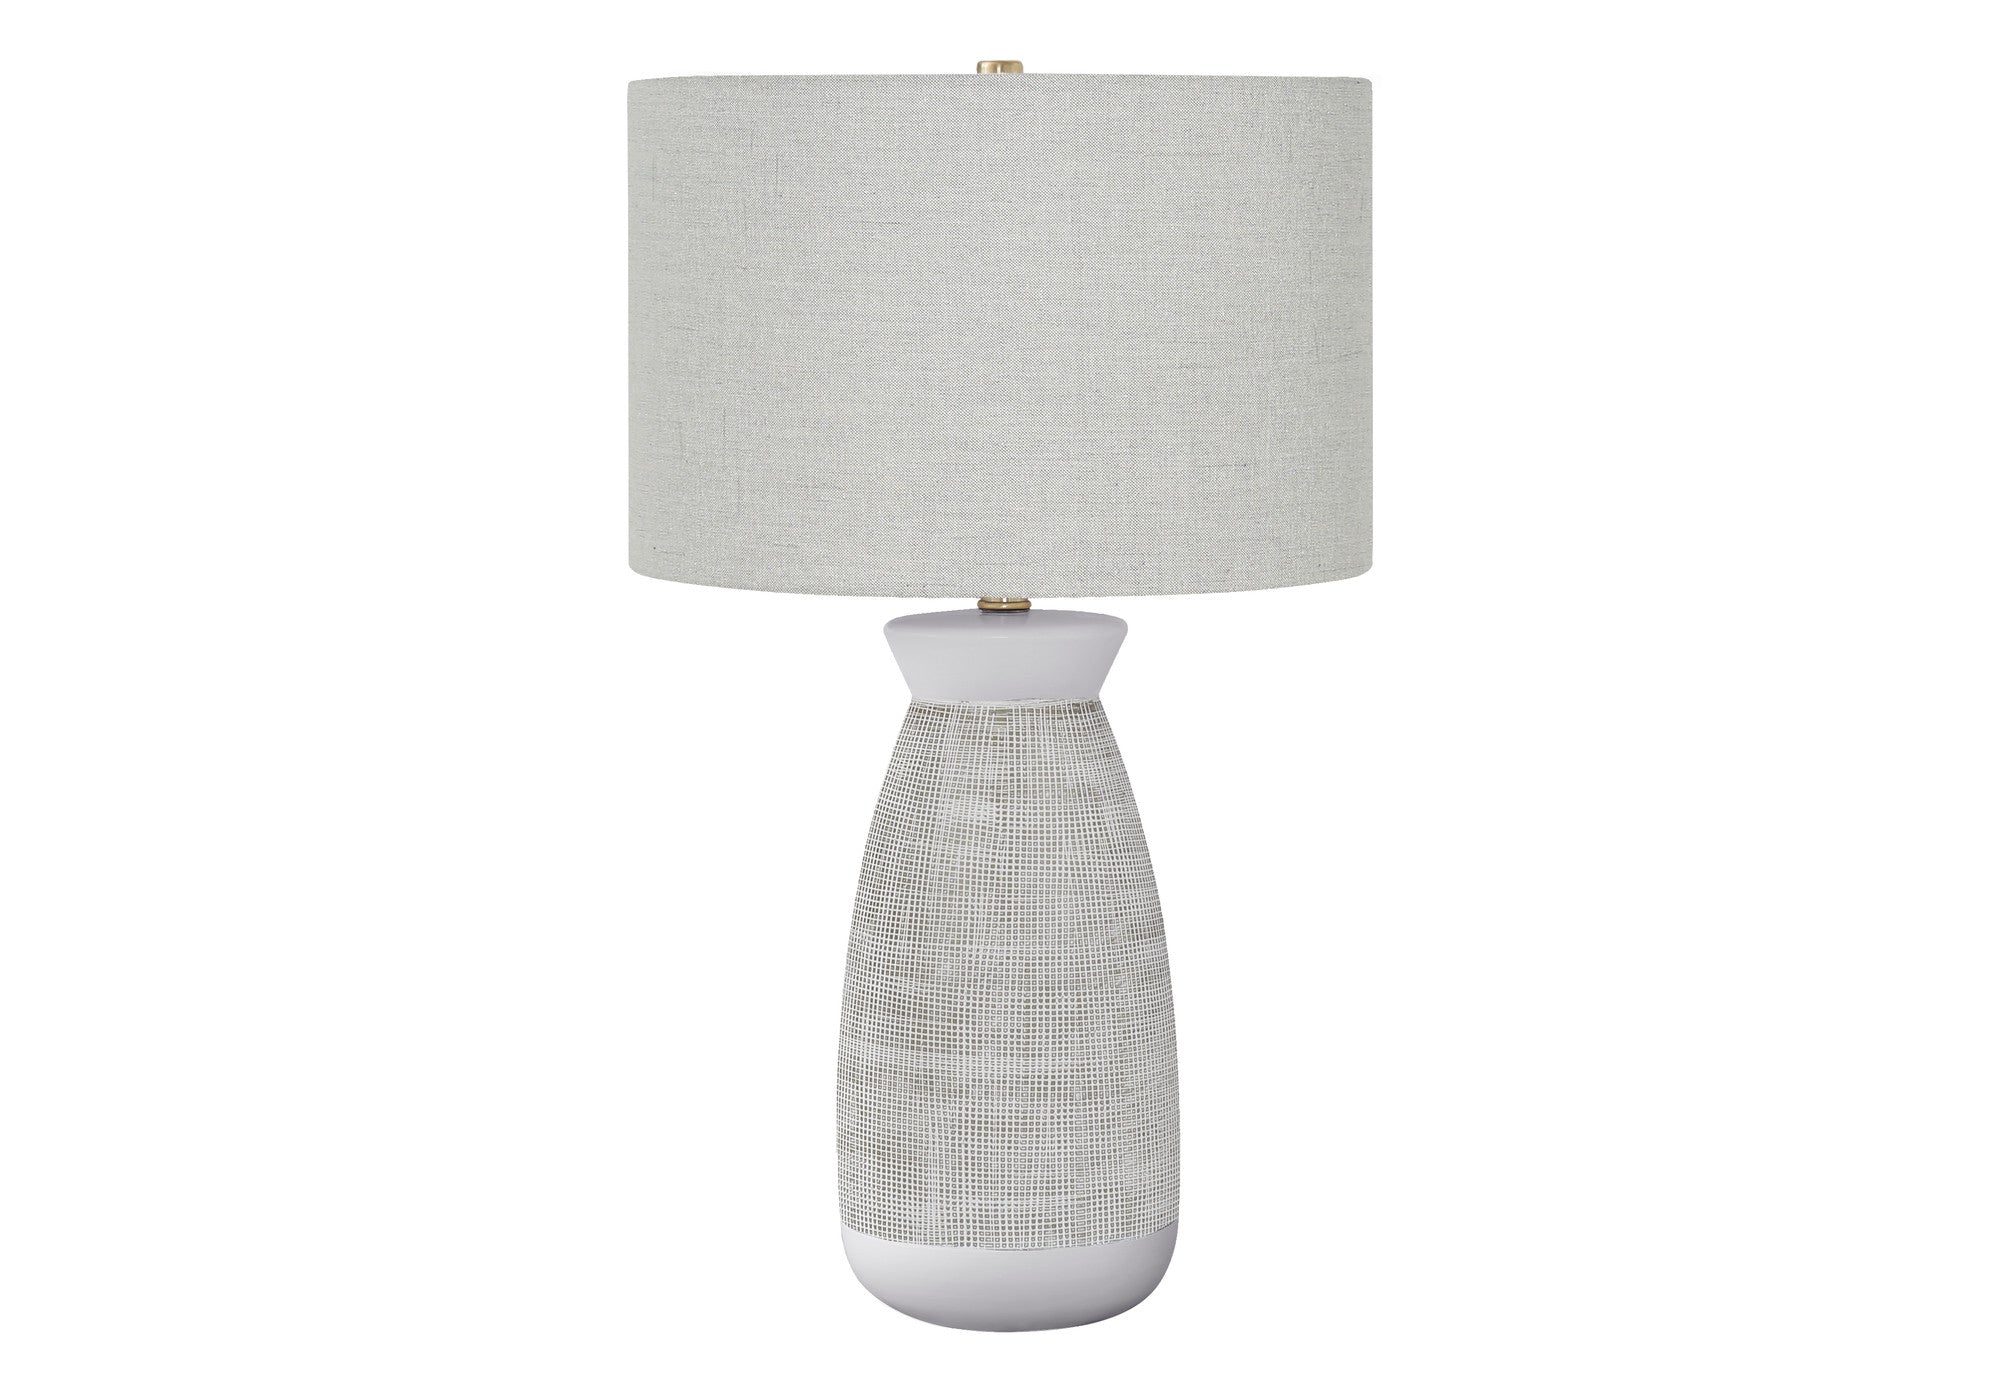 27" Gray and White Ceramic Round Table Lamp With Gray Drum Shade